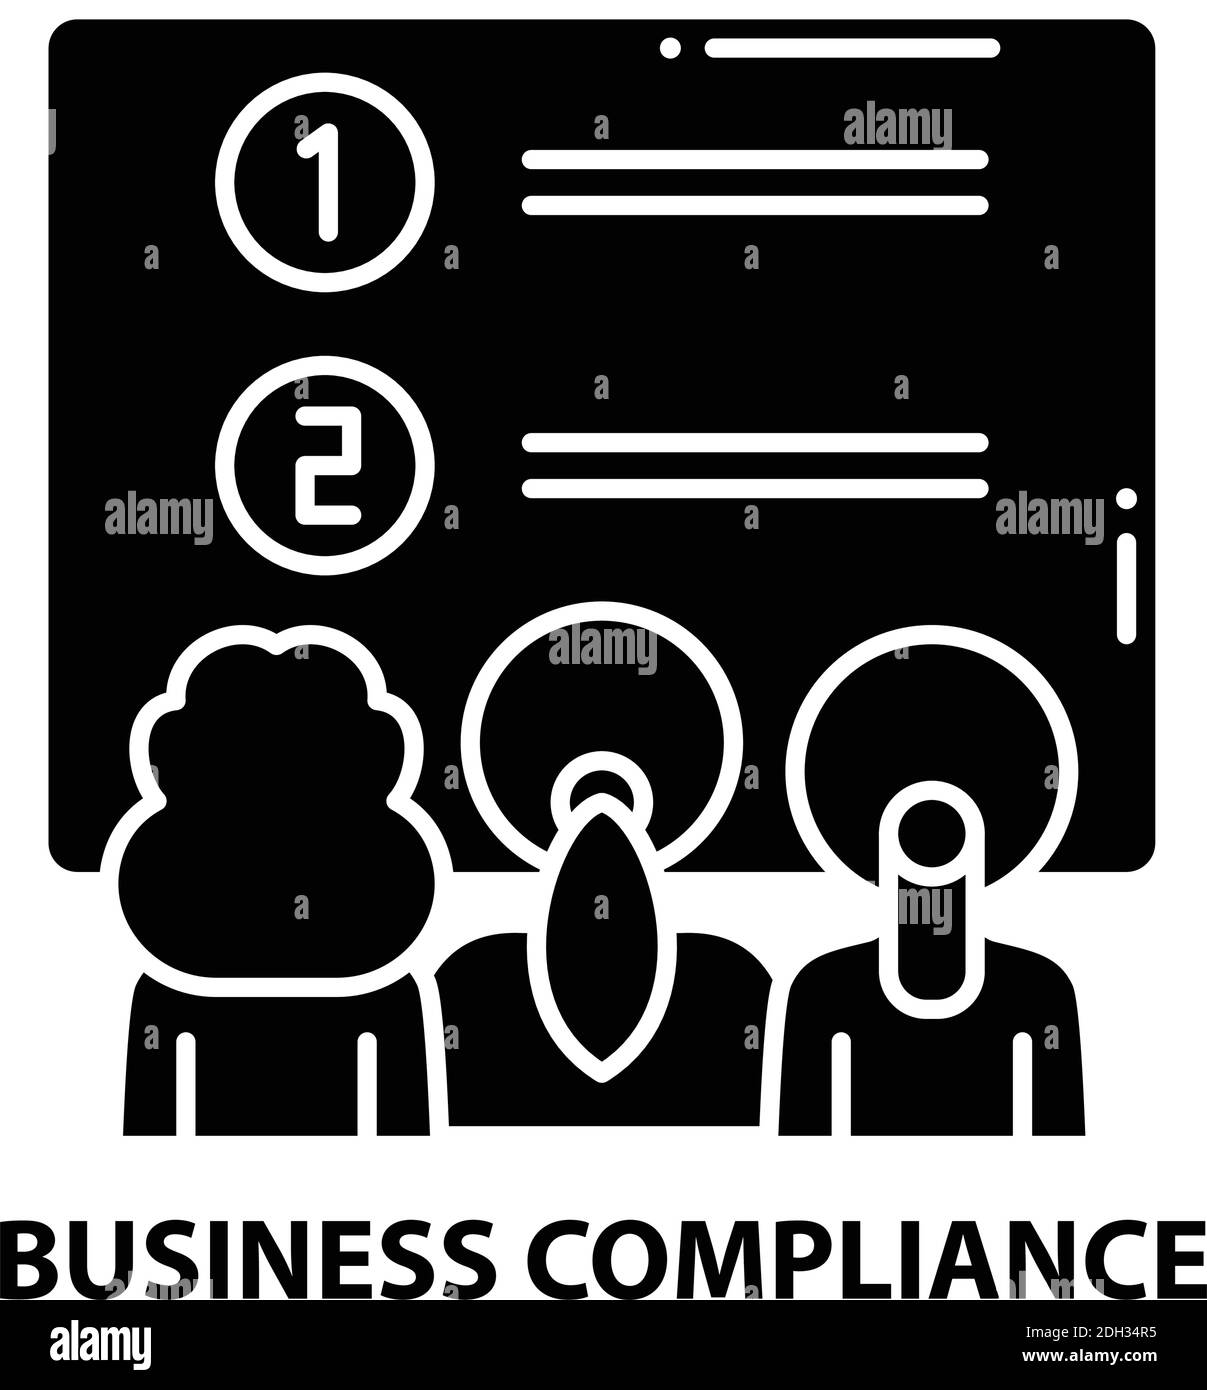 business compliance icon, black vector sign with editable strokes, concept illustration Stock Vector